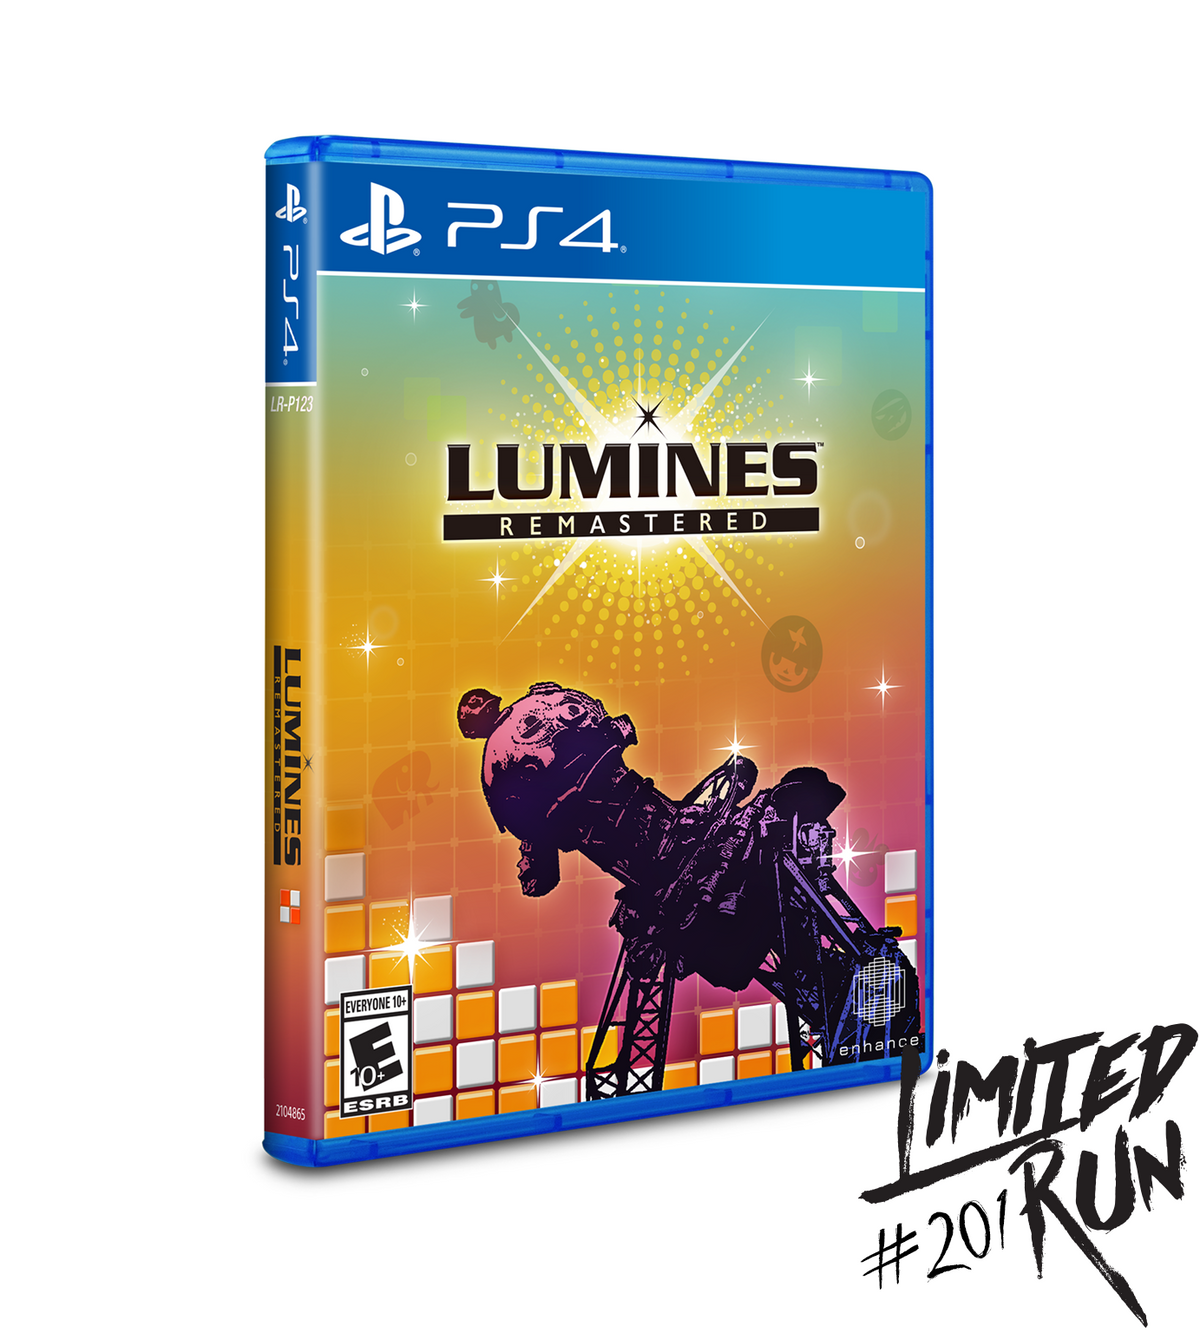 Limited Run #201: Lumines Remastered (PS4) [PREORDER]